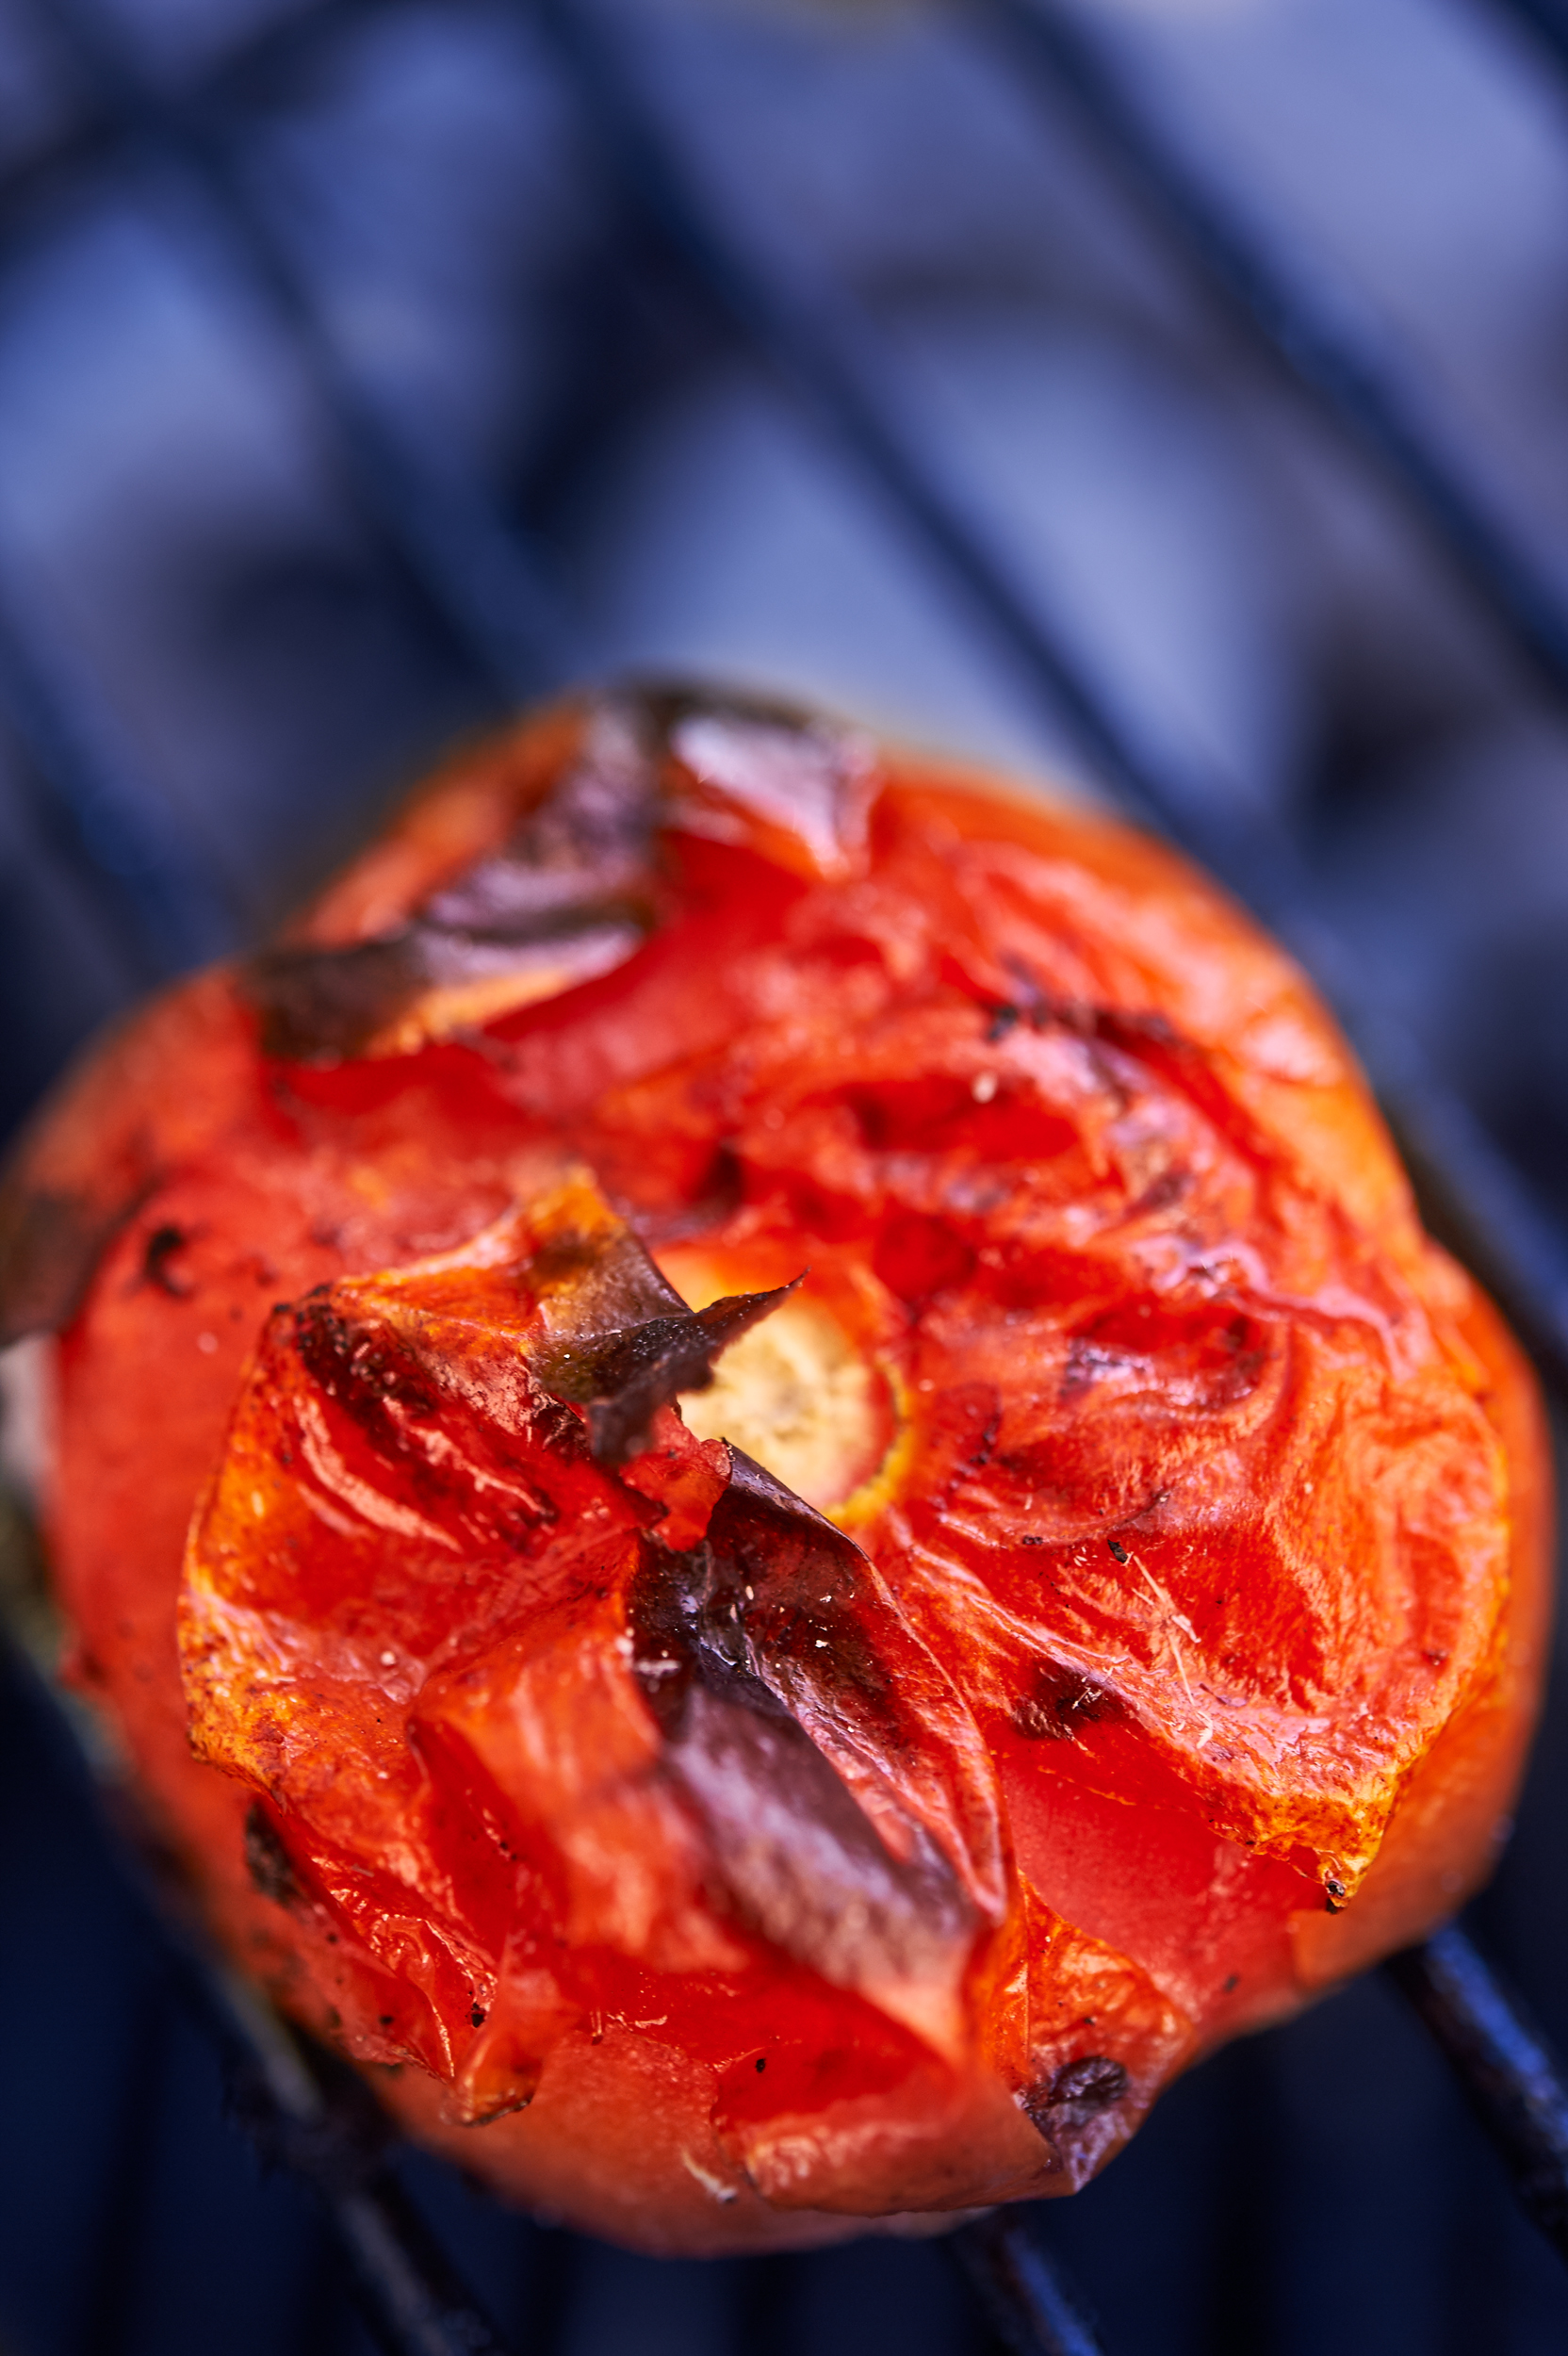 Grilled tomato close up